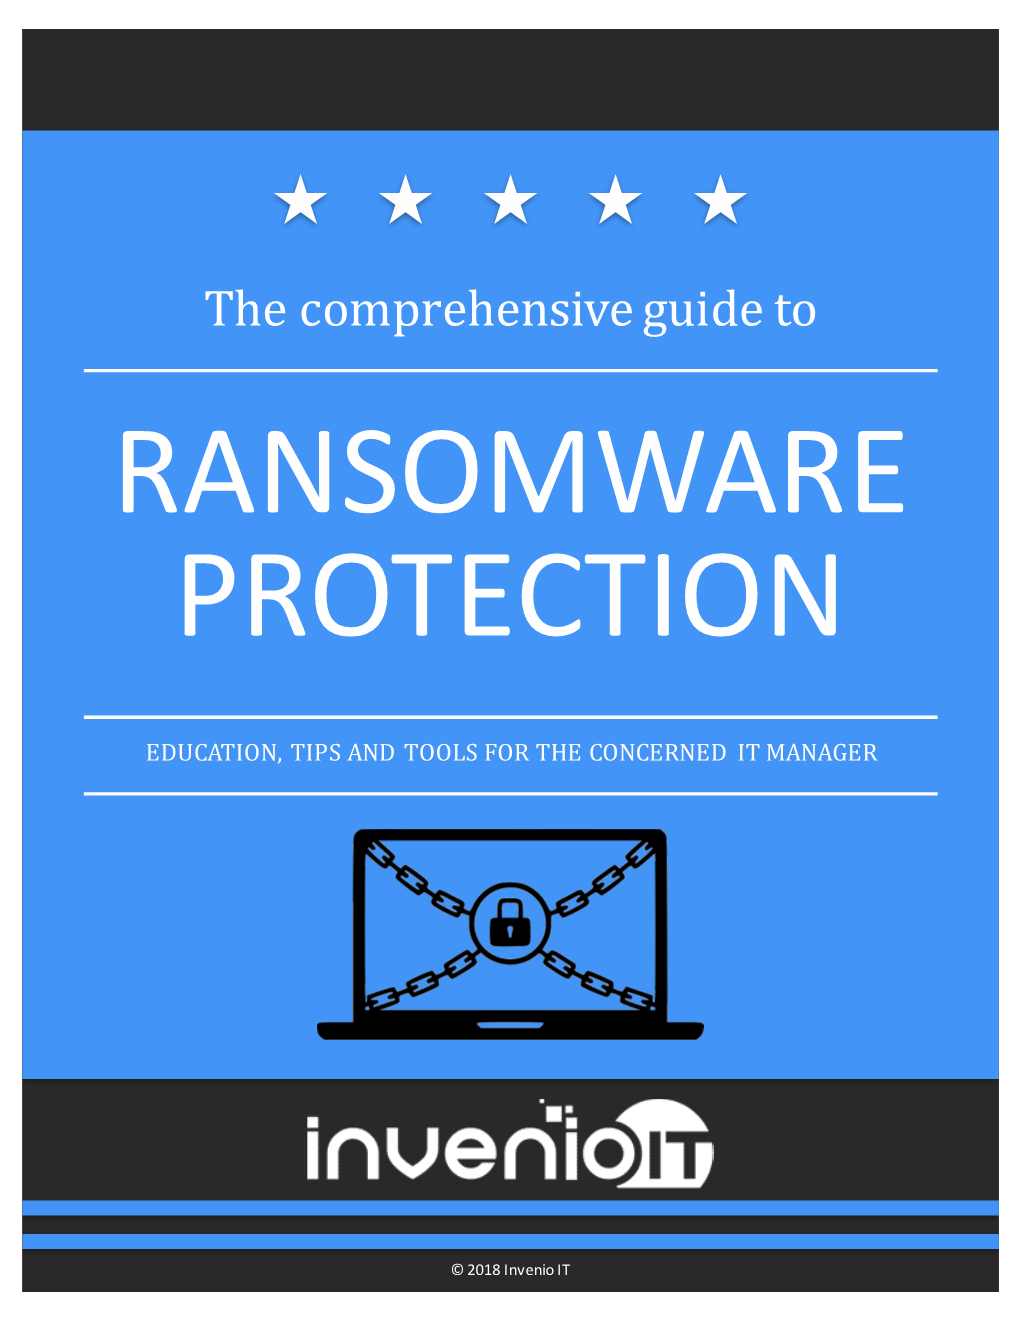 The Comprehensive Guide to RANSOMWARE PROTECTION